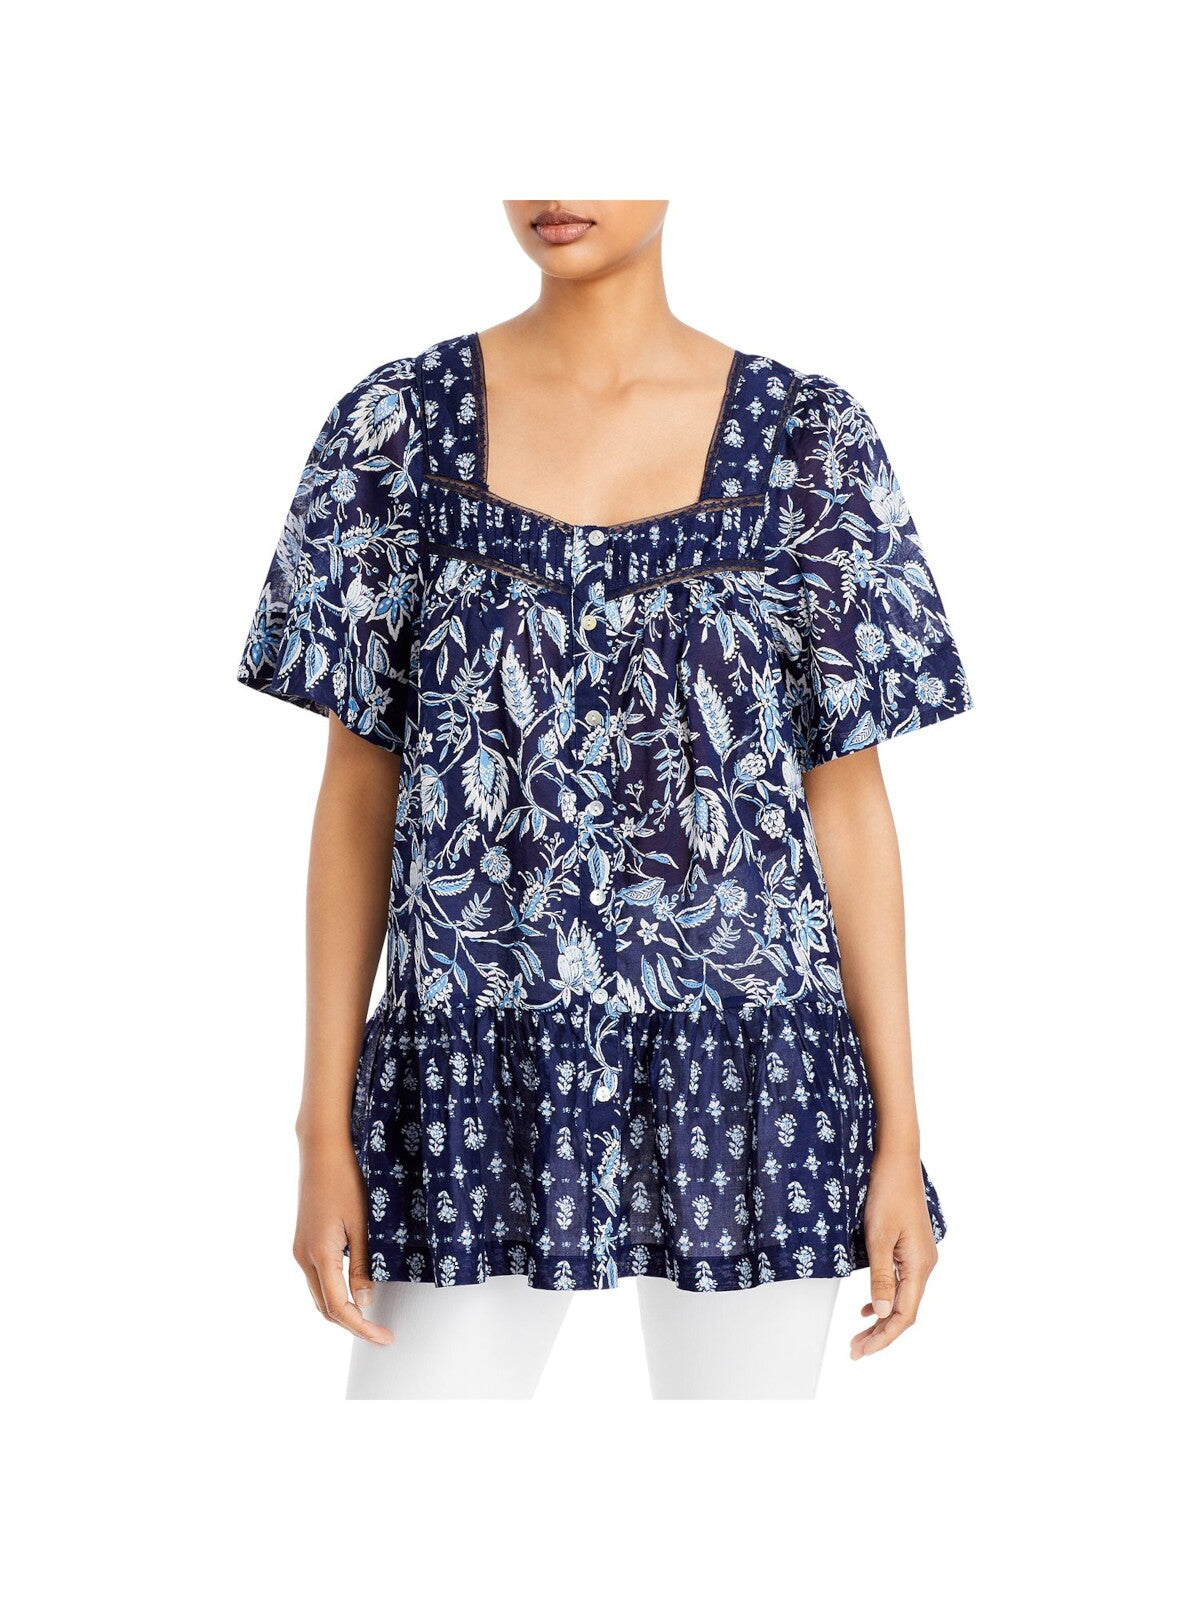 BEACHLUNCHLOUNGE COLLECTION Womens Lace Ruffled Button Down Bell Sleeve Square Neck Top